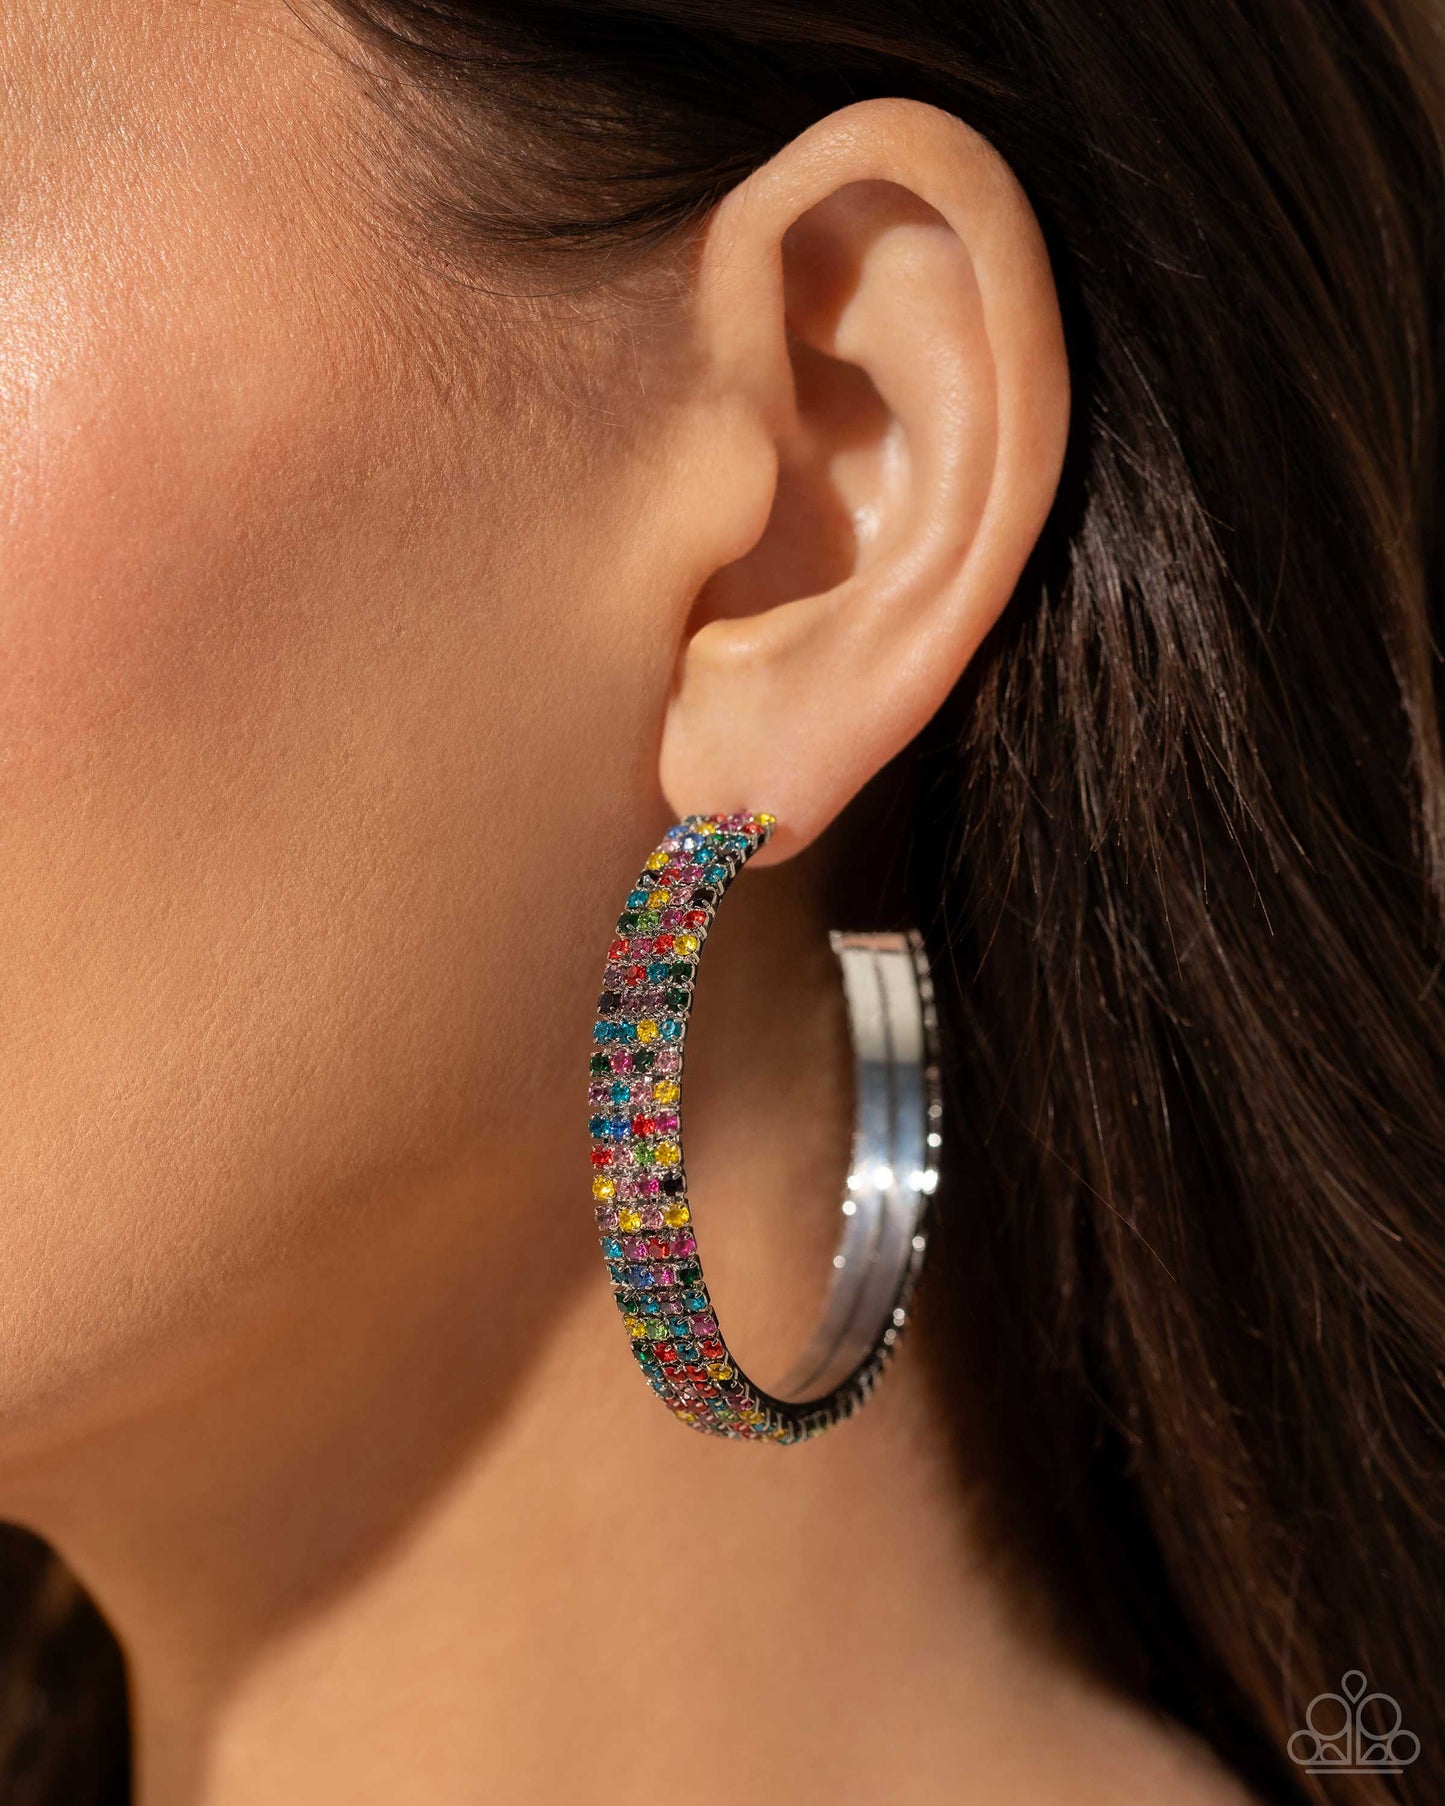 Set in silver square fittings, row after row of multicolored rhinestones are embellished around a silver hoop for a dazzling design. Earring attaches to a standard post fitting. Hoop measures approximately 2" in diameter.